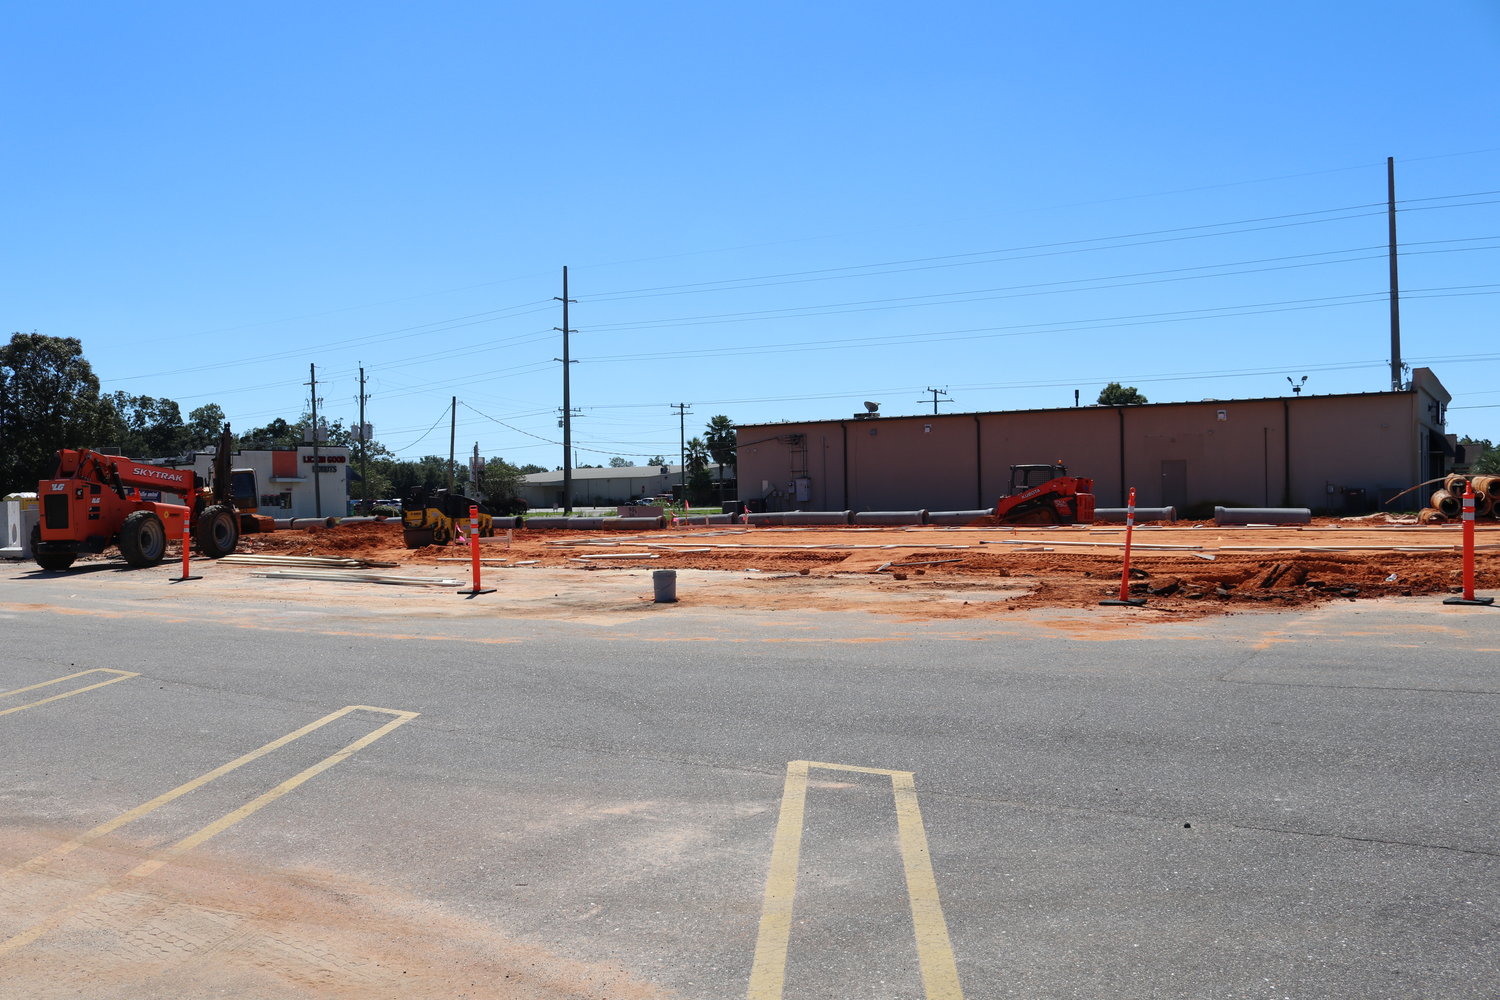 The old Rite Aid building has been demolished to make way for a new, modern Taco Bell.